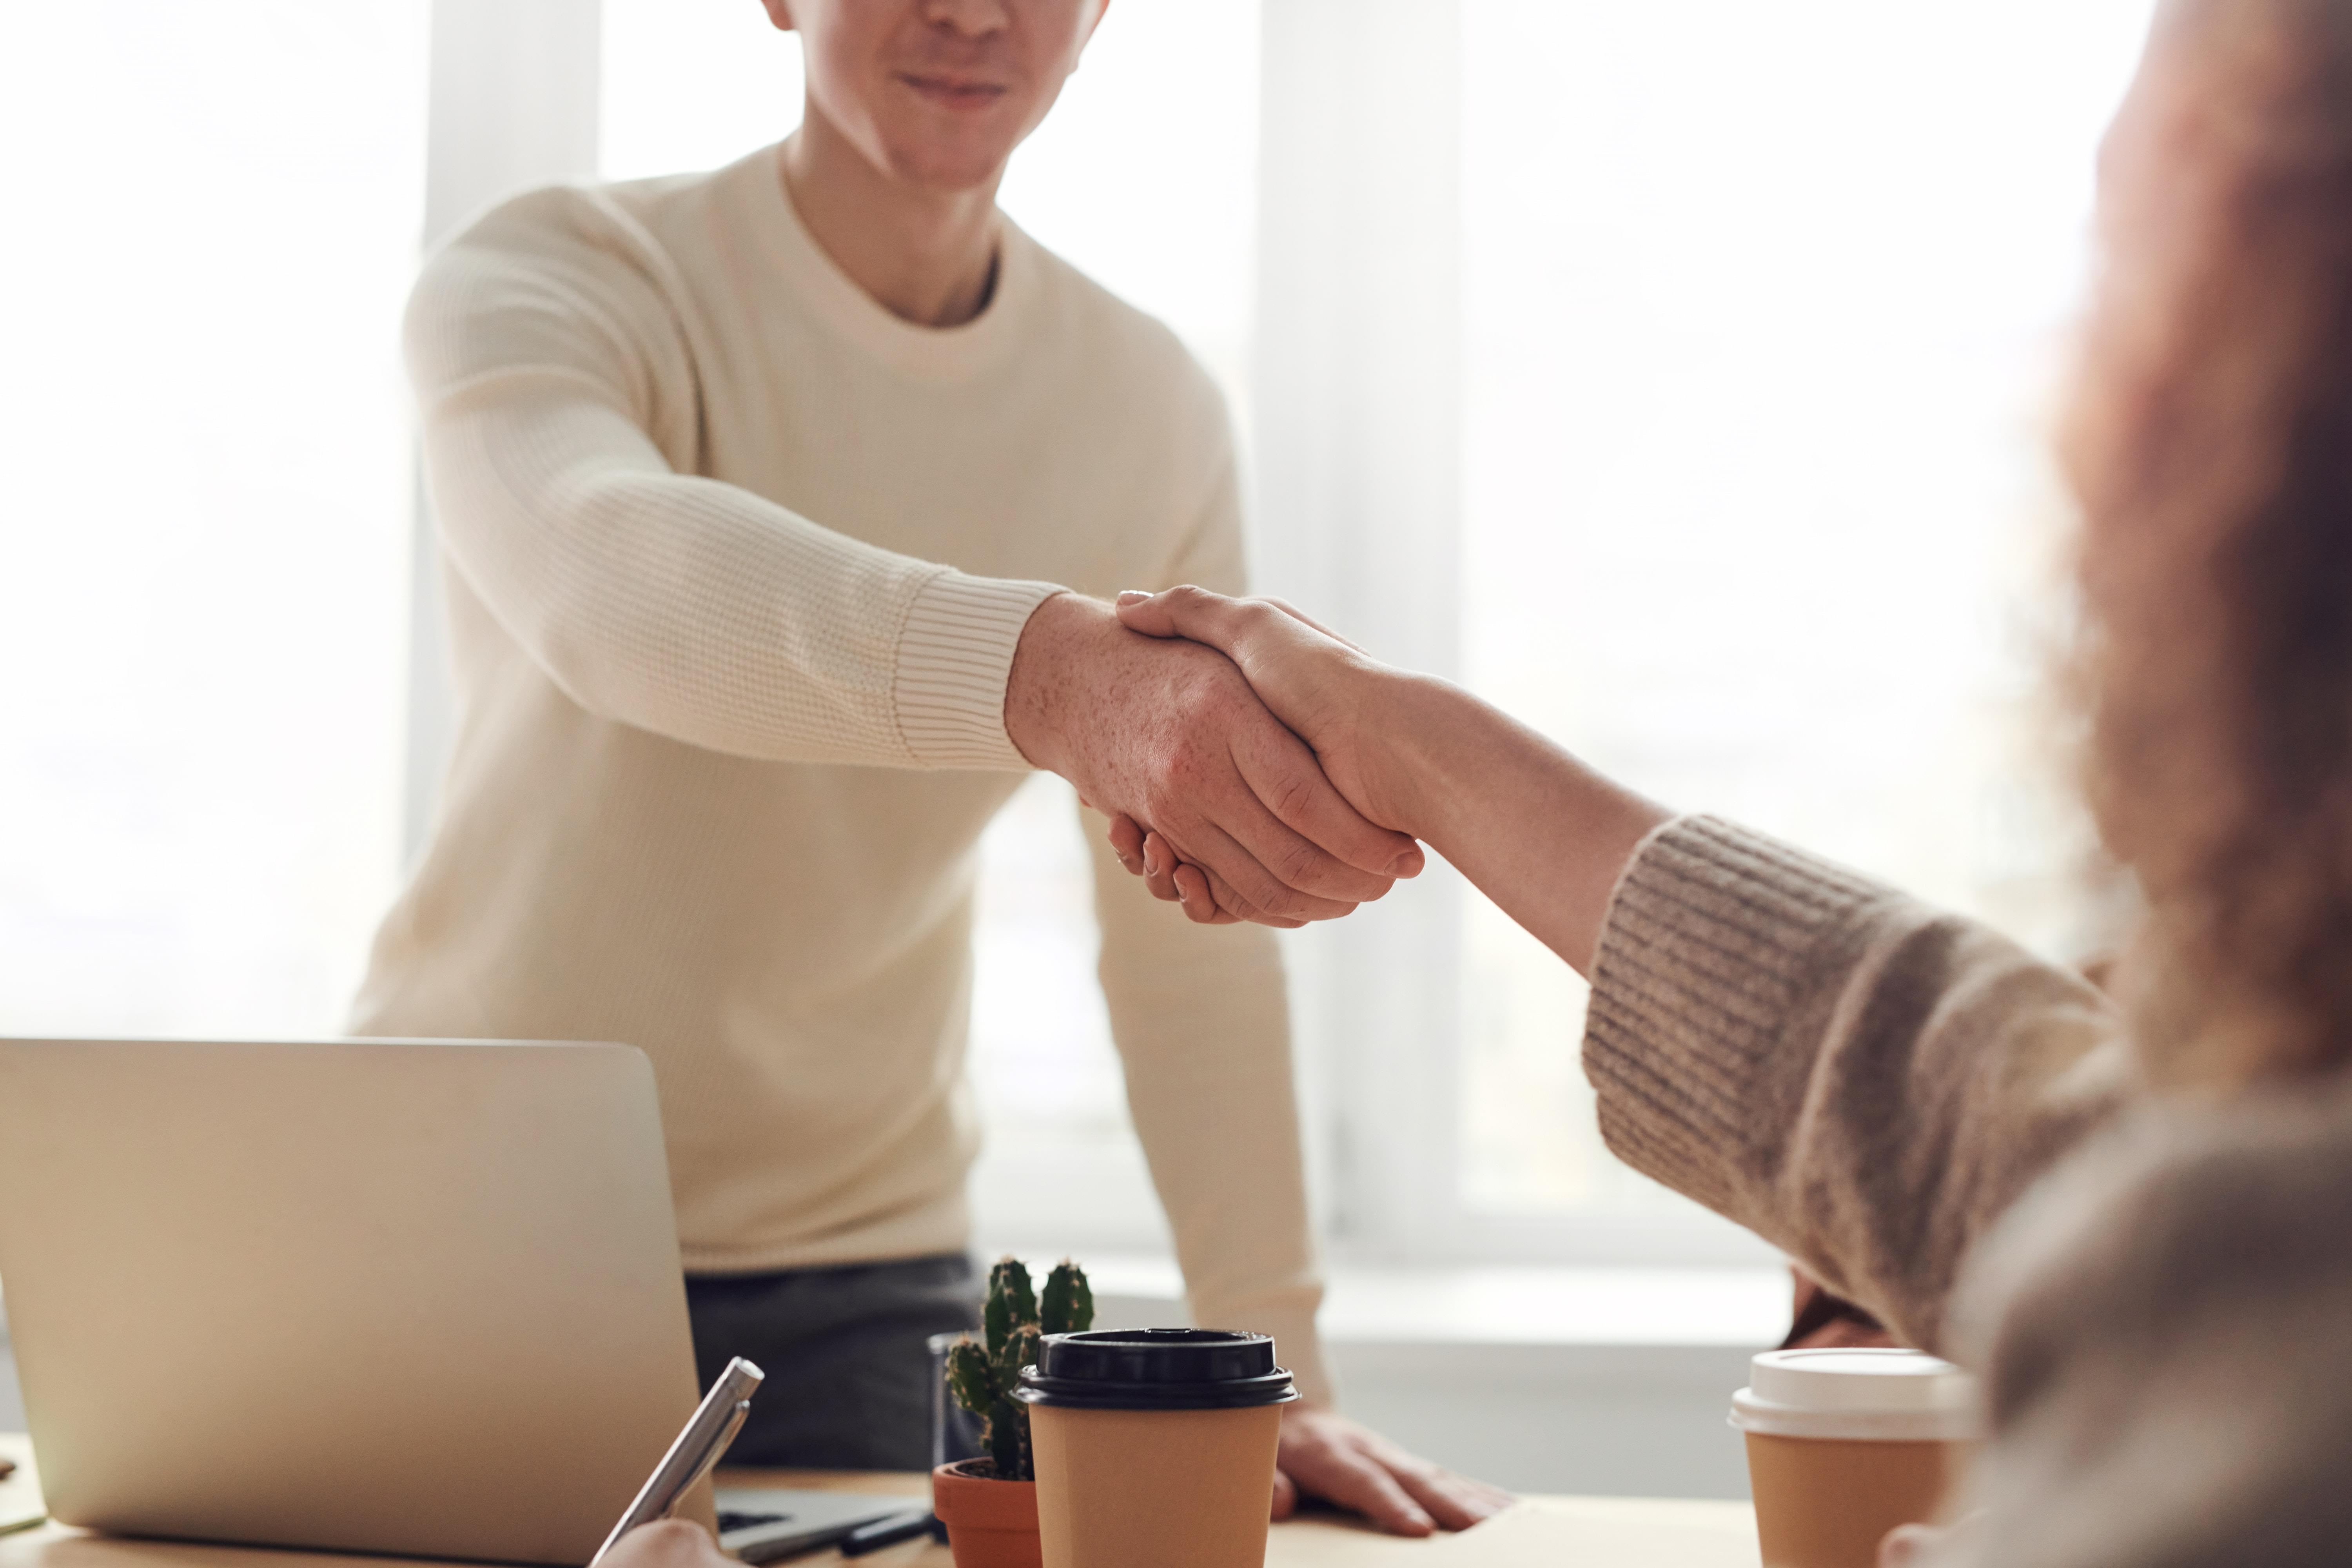 Two people shaking hands across a table after negotiation